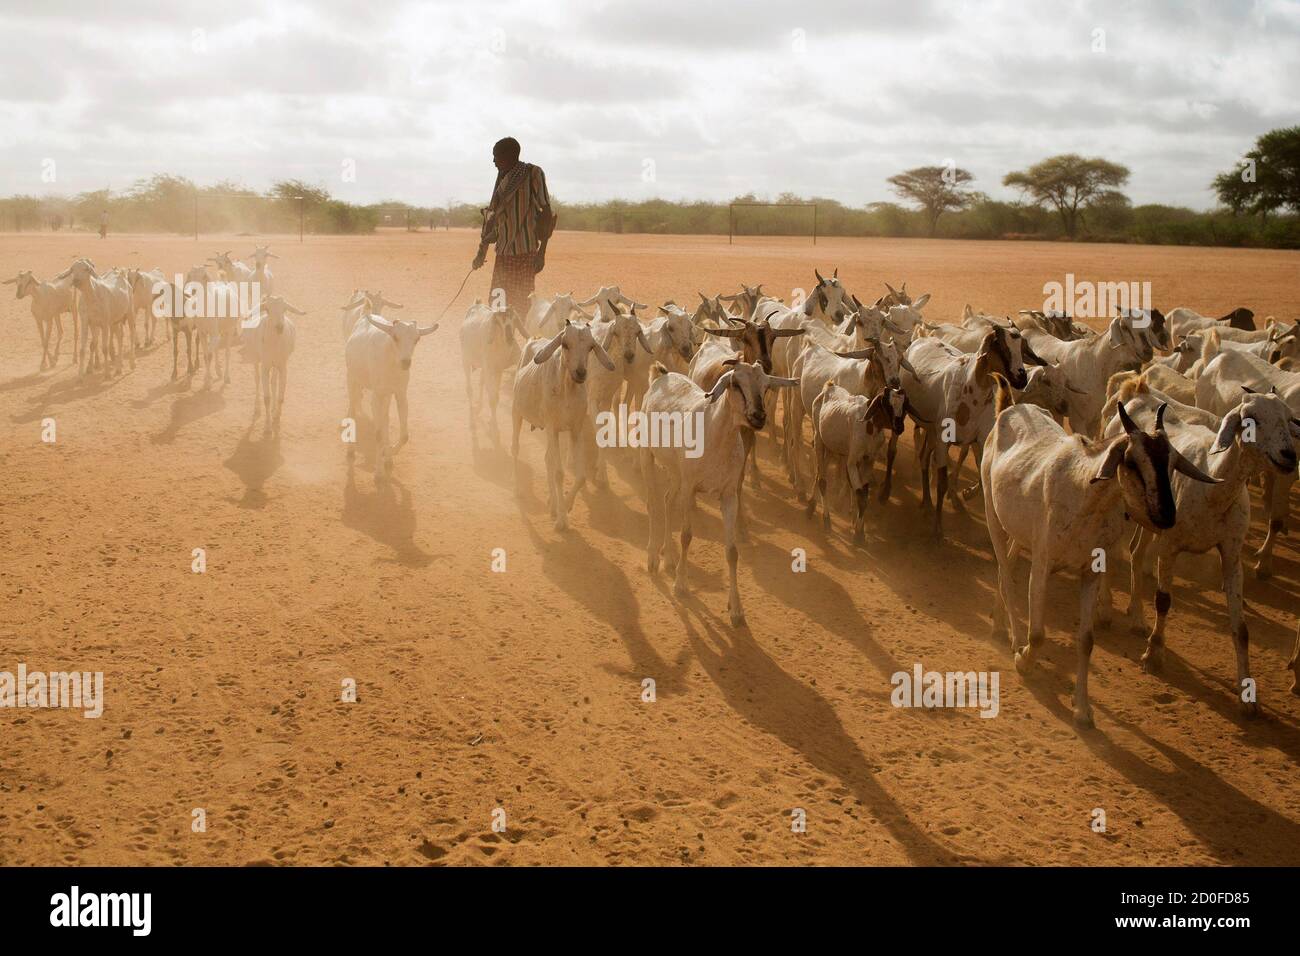 A man herds livestock to a grazing ground in the early hours of the morning near Dagahale, one of several refugee settlements in Dadaab, Garissa County, northeastern Kenya October 9, 2013.  REUTERS/Siegfried Modola  (KENYA - Tags: SOCIETY ANIMALS) Stock Photo